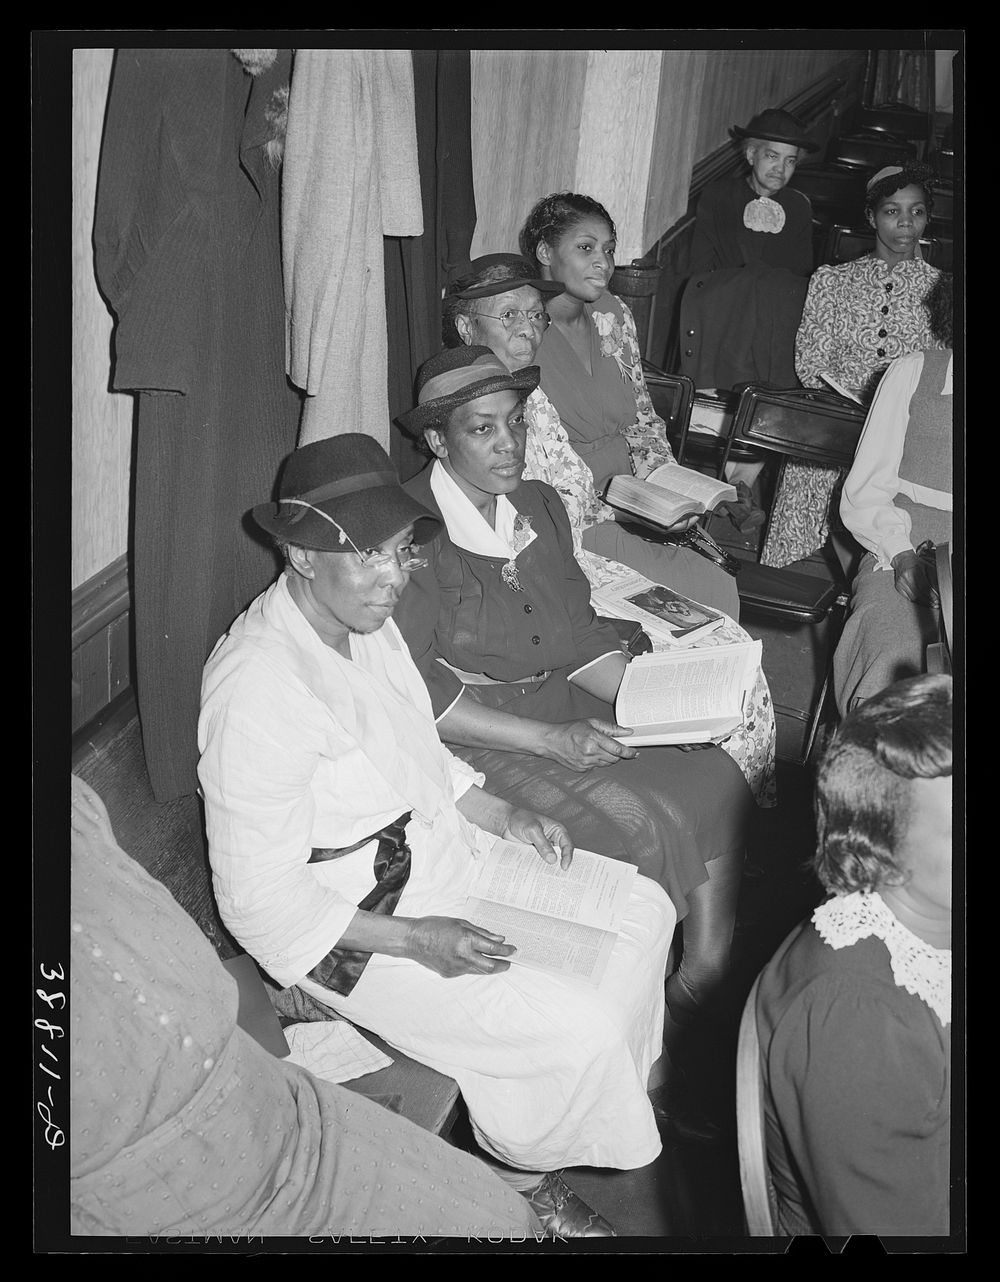 Members of the congregation of the "storefront" Baptist church. Chicago, Illinois by Russell Lee